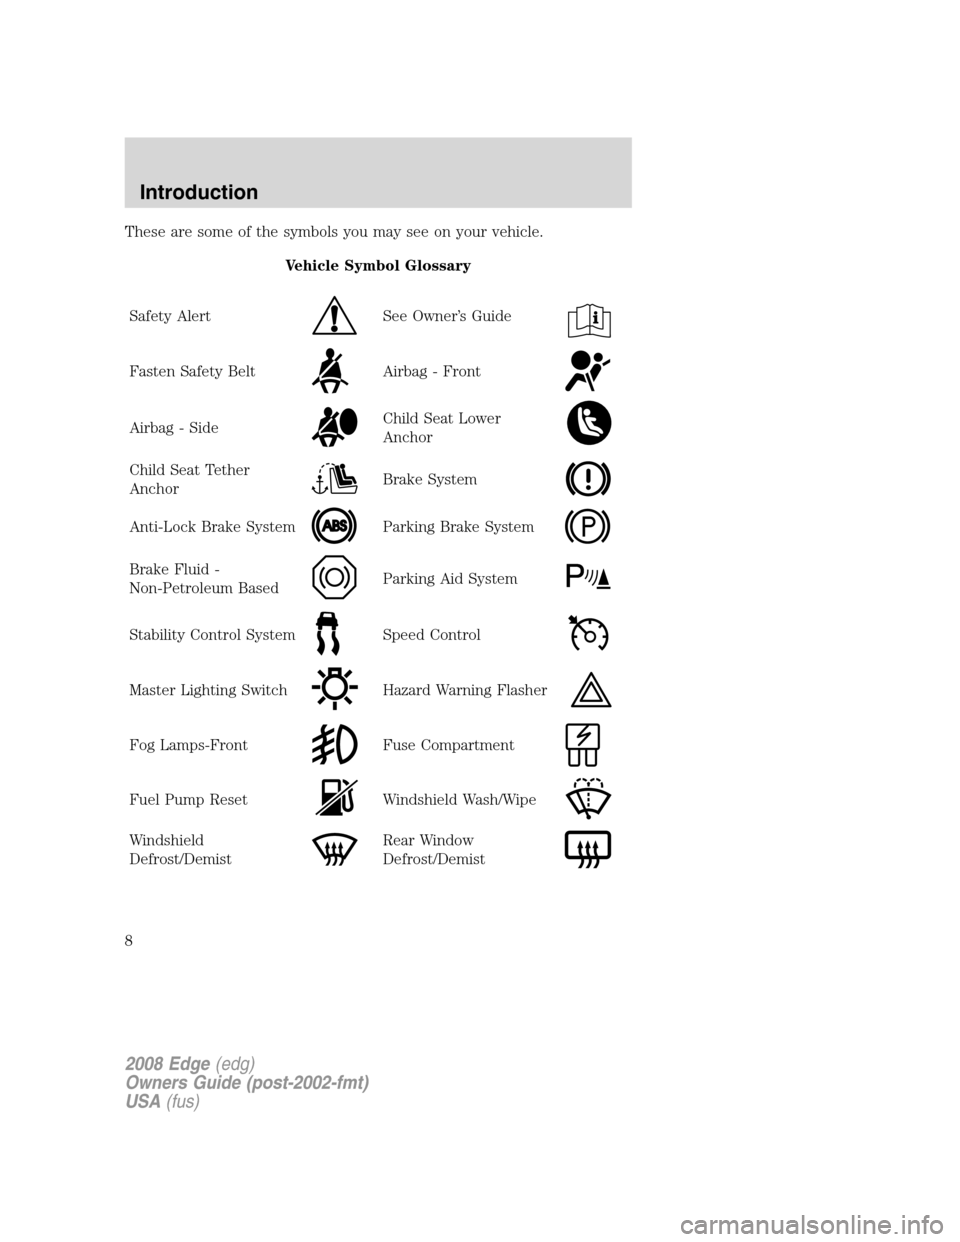 FORD EDGE 2008 1.G Owners Manual These are some of the symbols you may see on your vehicle.
Vehicle Symbol Glossary
Safety Alert
See Owner’s Guide
Fasten Safety BeltAirbag - Front
Airbag - SideChild Seat Lower
Anchor
Child Seat Tet